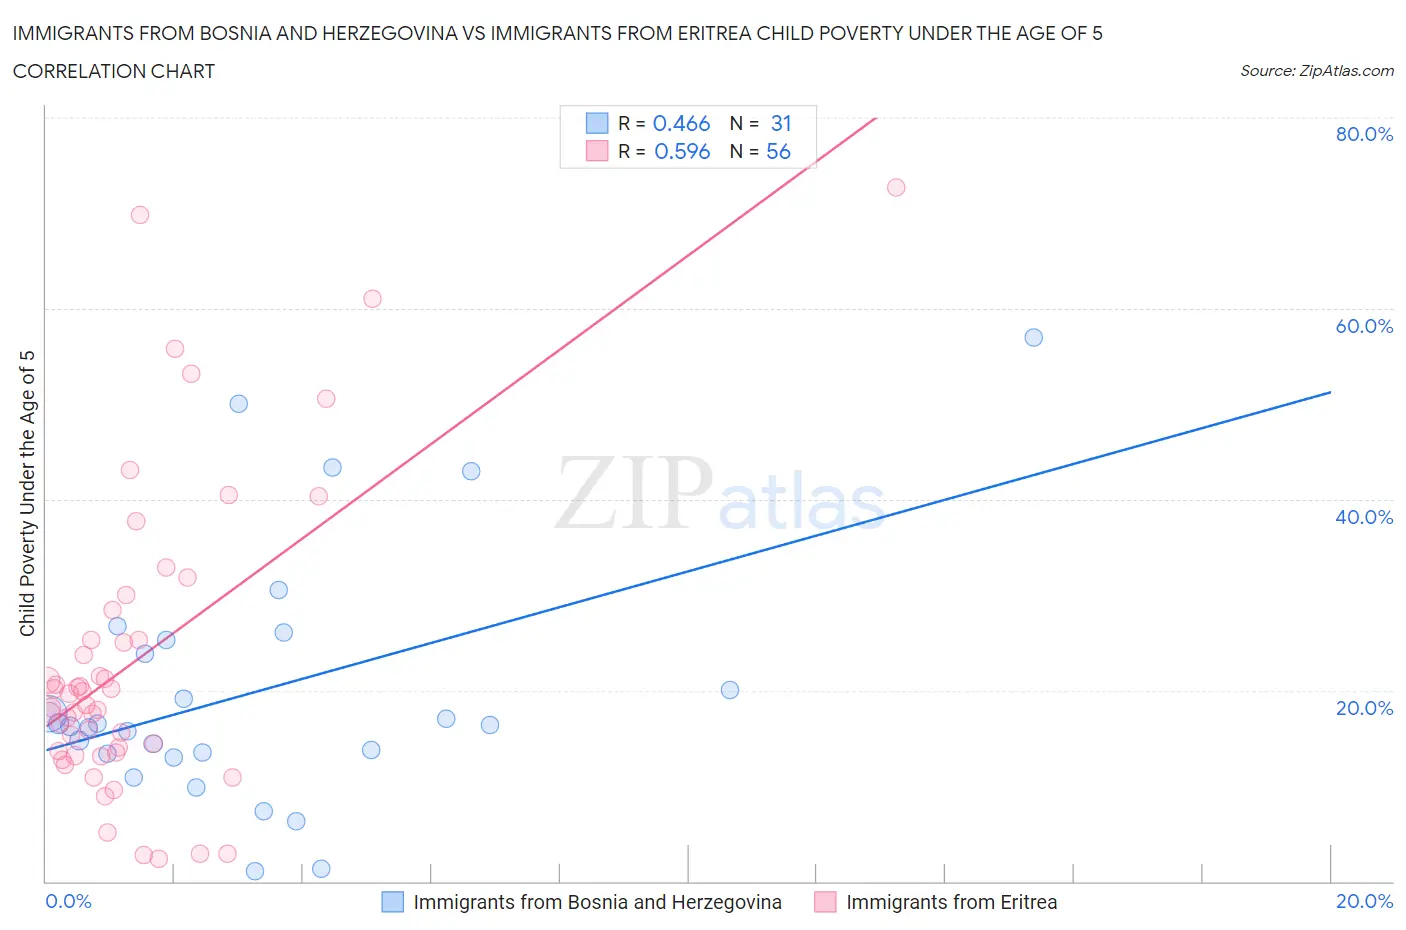 Immigrants from Bosnia and Herzegovina vs Immigrants from Eritrea Child Poverty Under the Age of 5